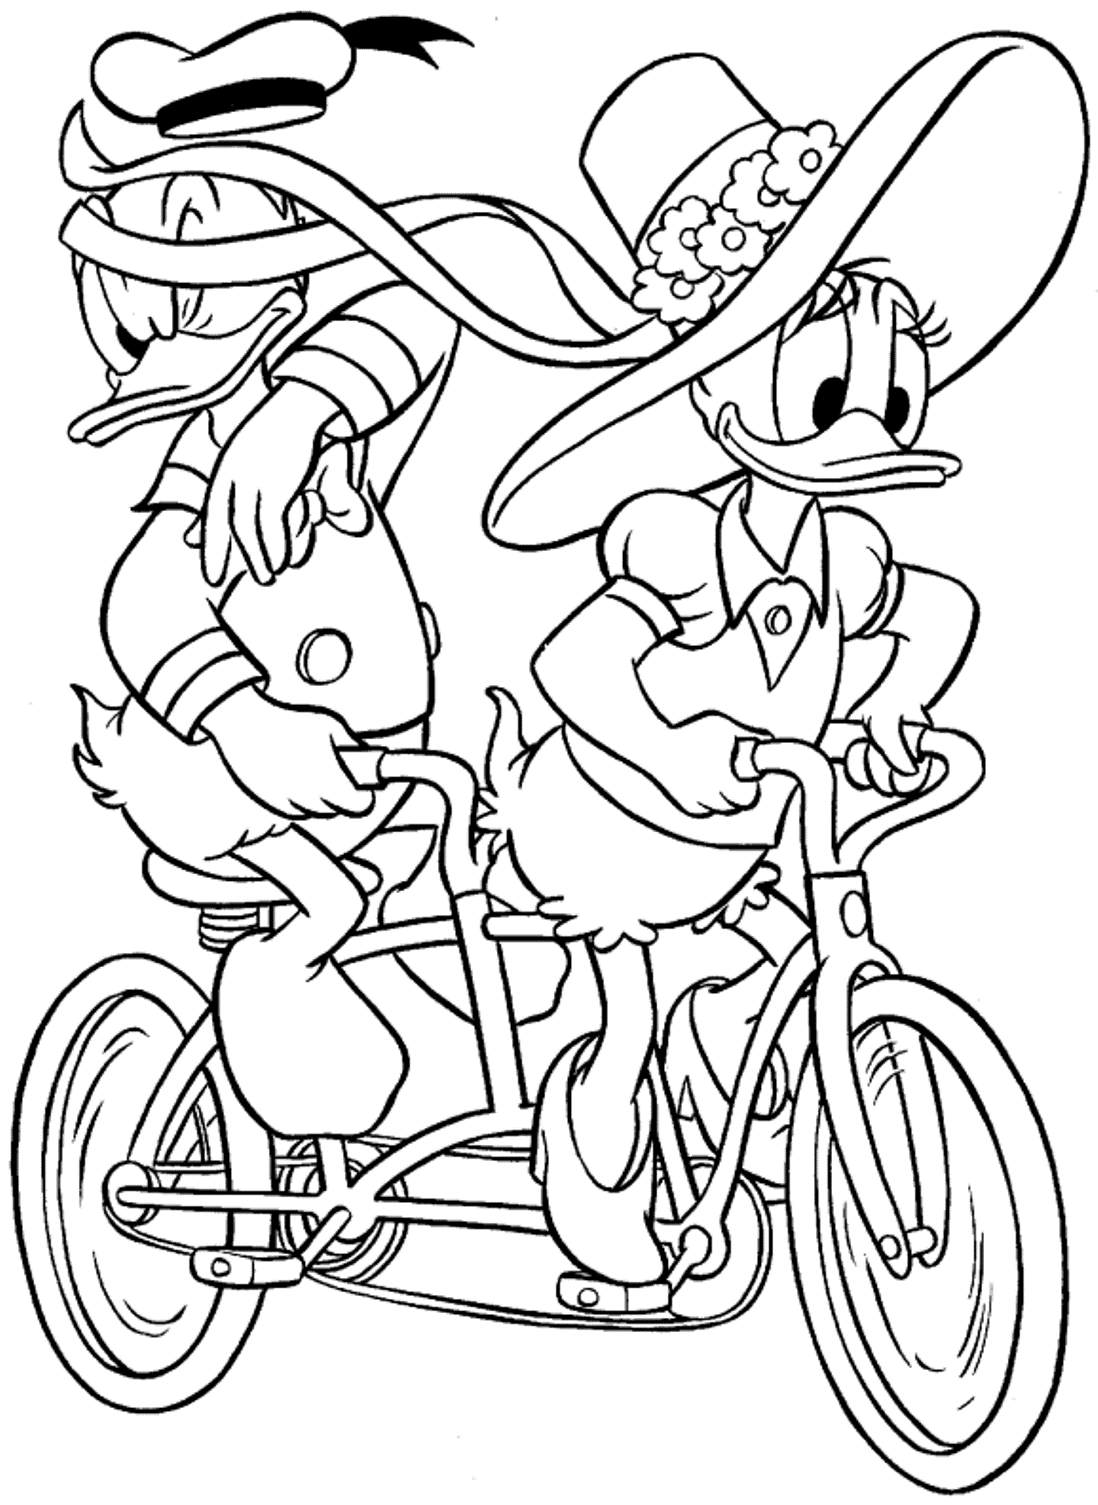 Daisy And Donald Duck Coloring Pages | Cartoon Coloring pages of ...